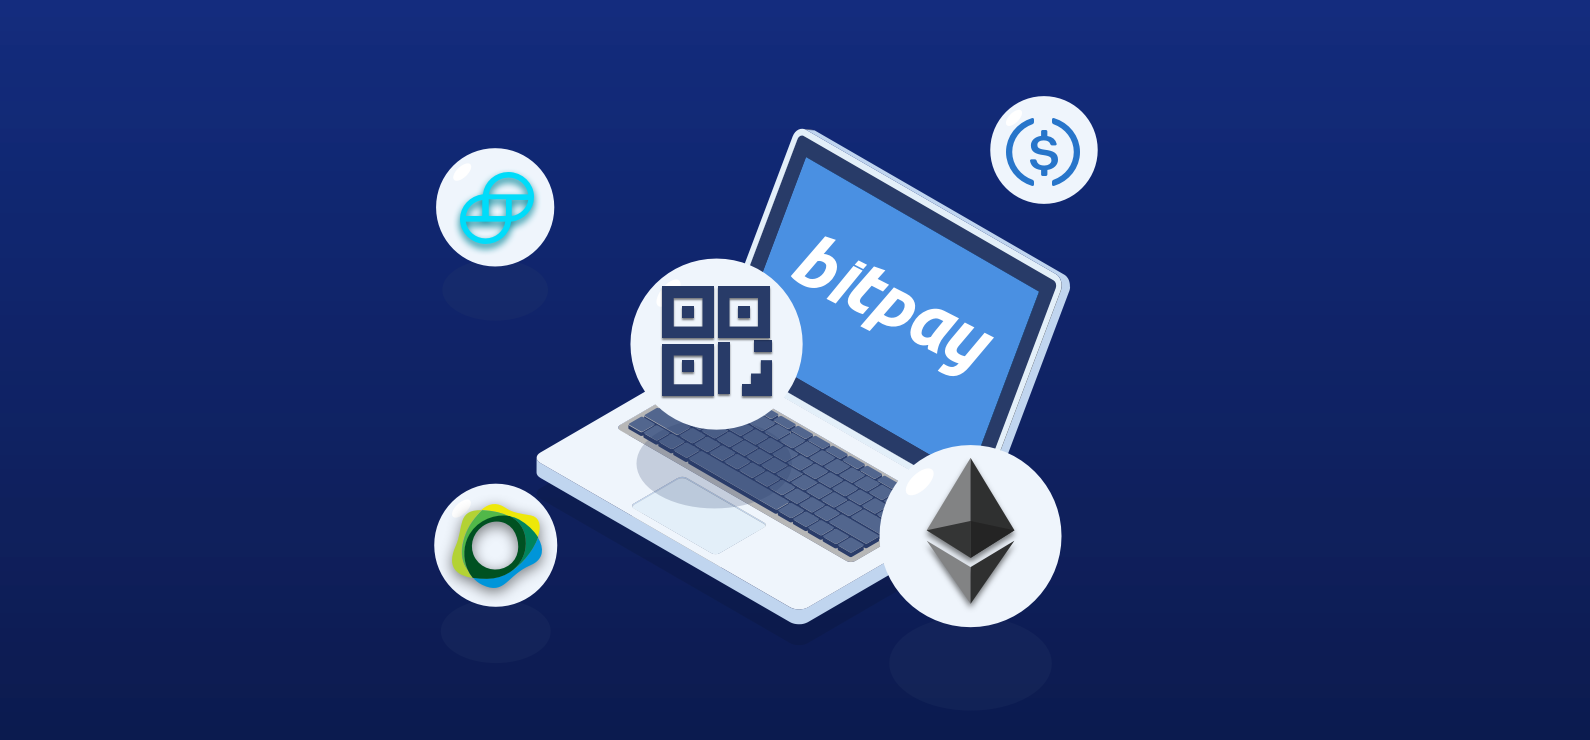 Bitpay Users Can Now Purchase Crypto With Fiat In-App